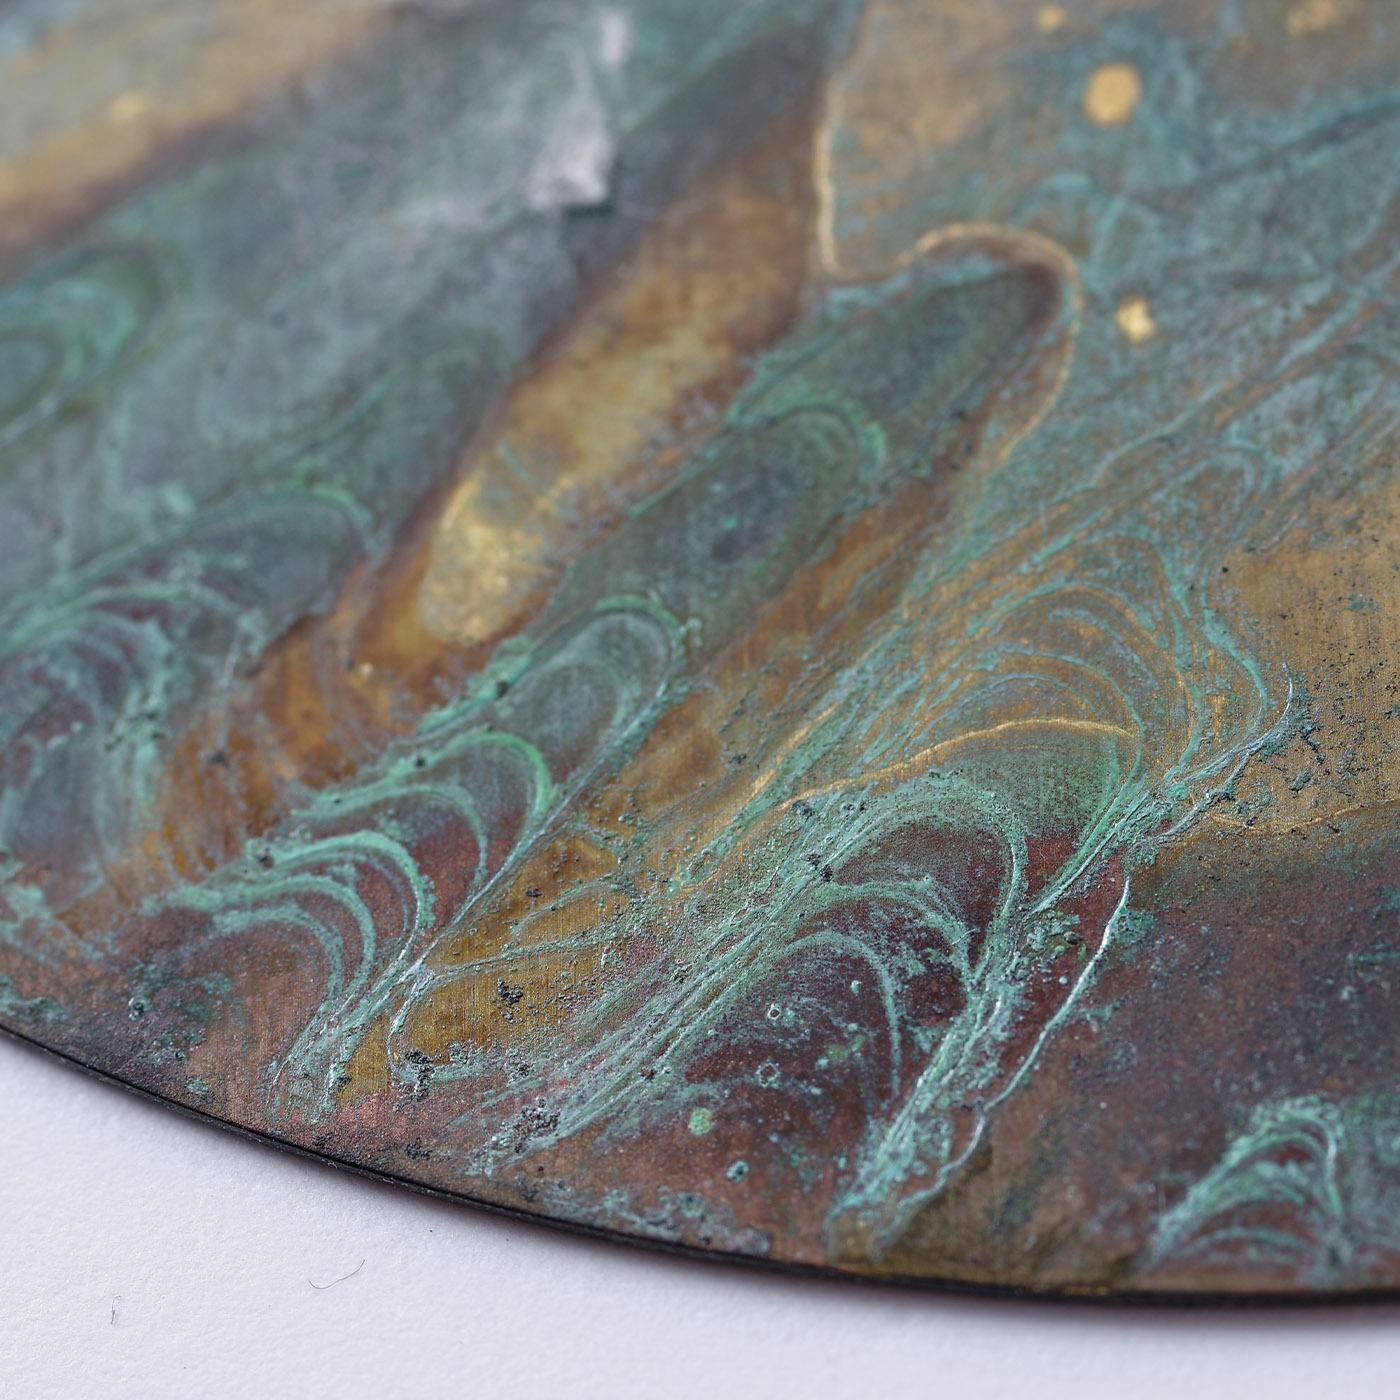 A splendid set of six handcrafted brass coasters where stunning gradients of blue, teal, beige, and burgundy coexist in a galaxy-like design traced by the interaction of the material with oxides. Each coaster is unique in its aesthetic and features